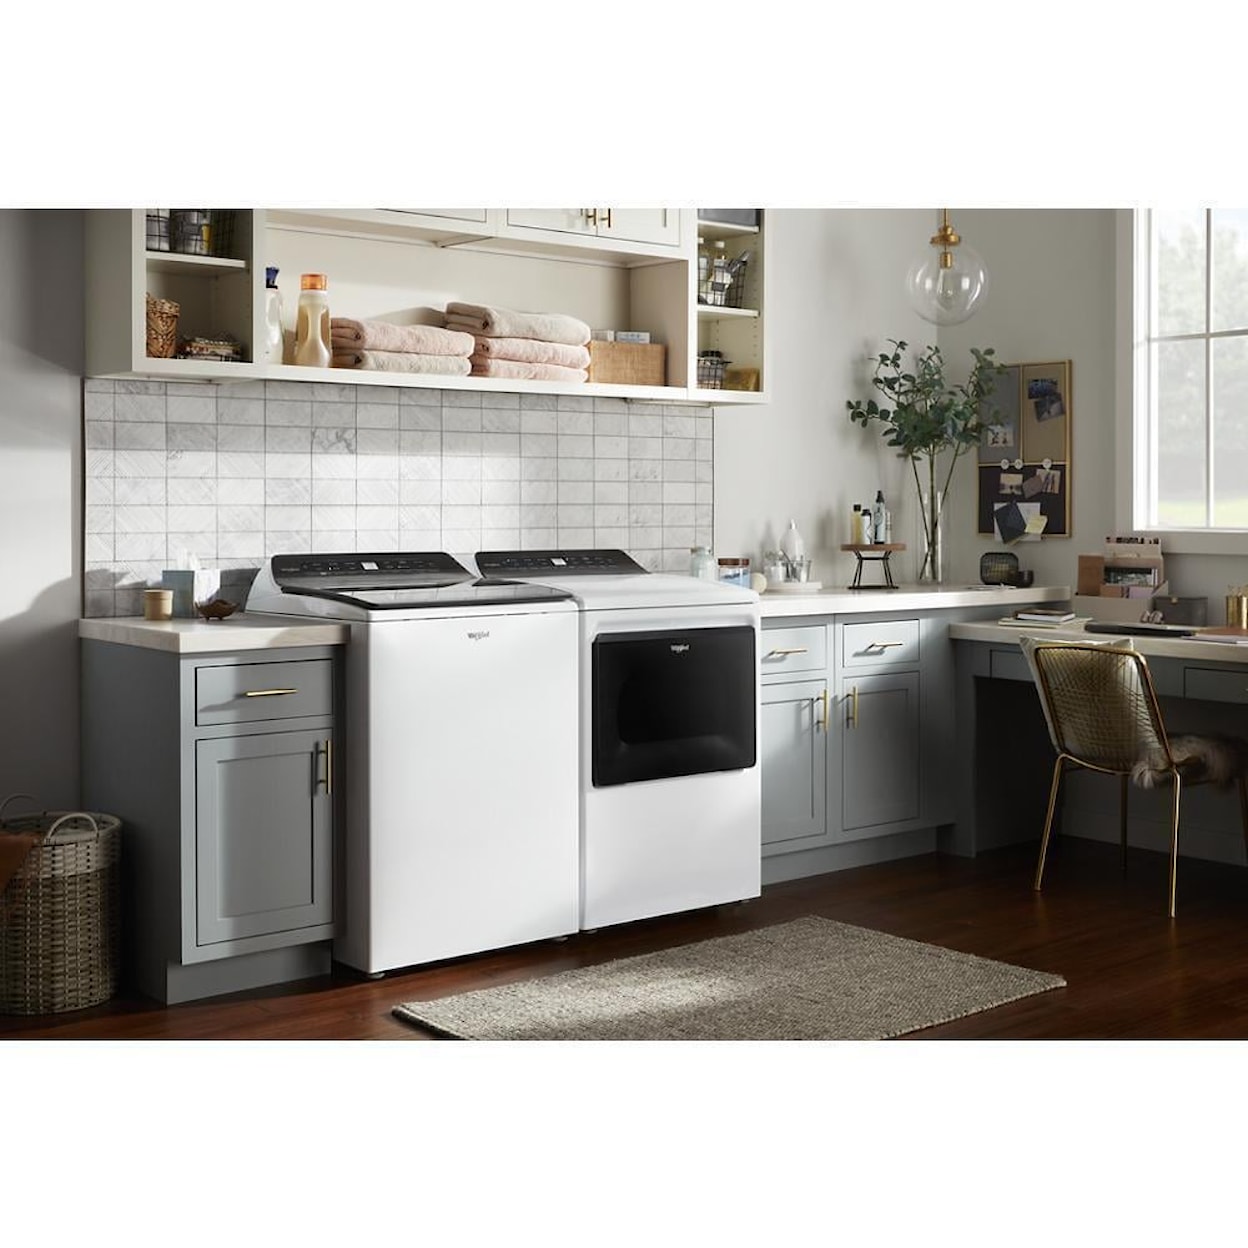 Whirlpool Laundry Top Load Matching Electric Dryer